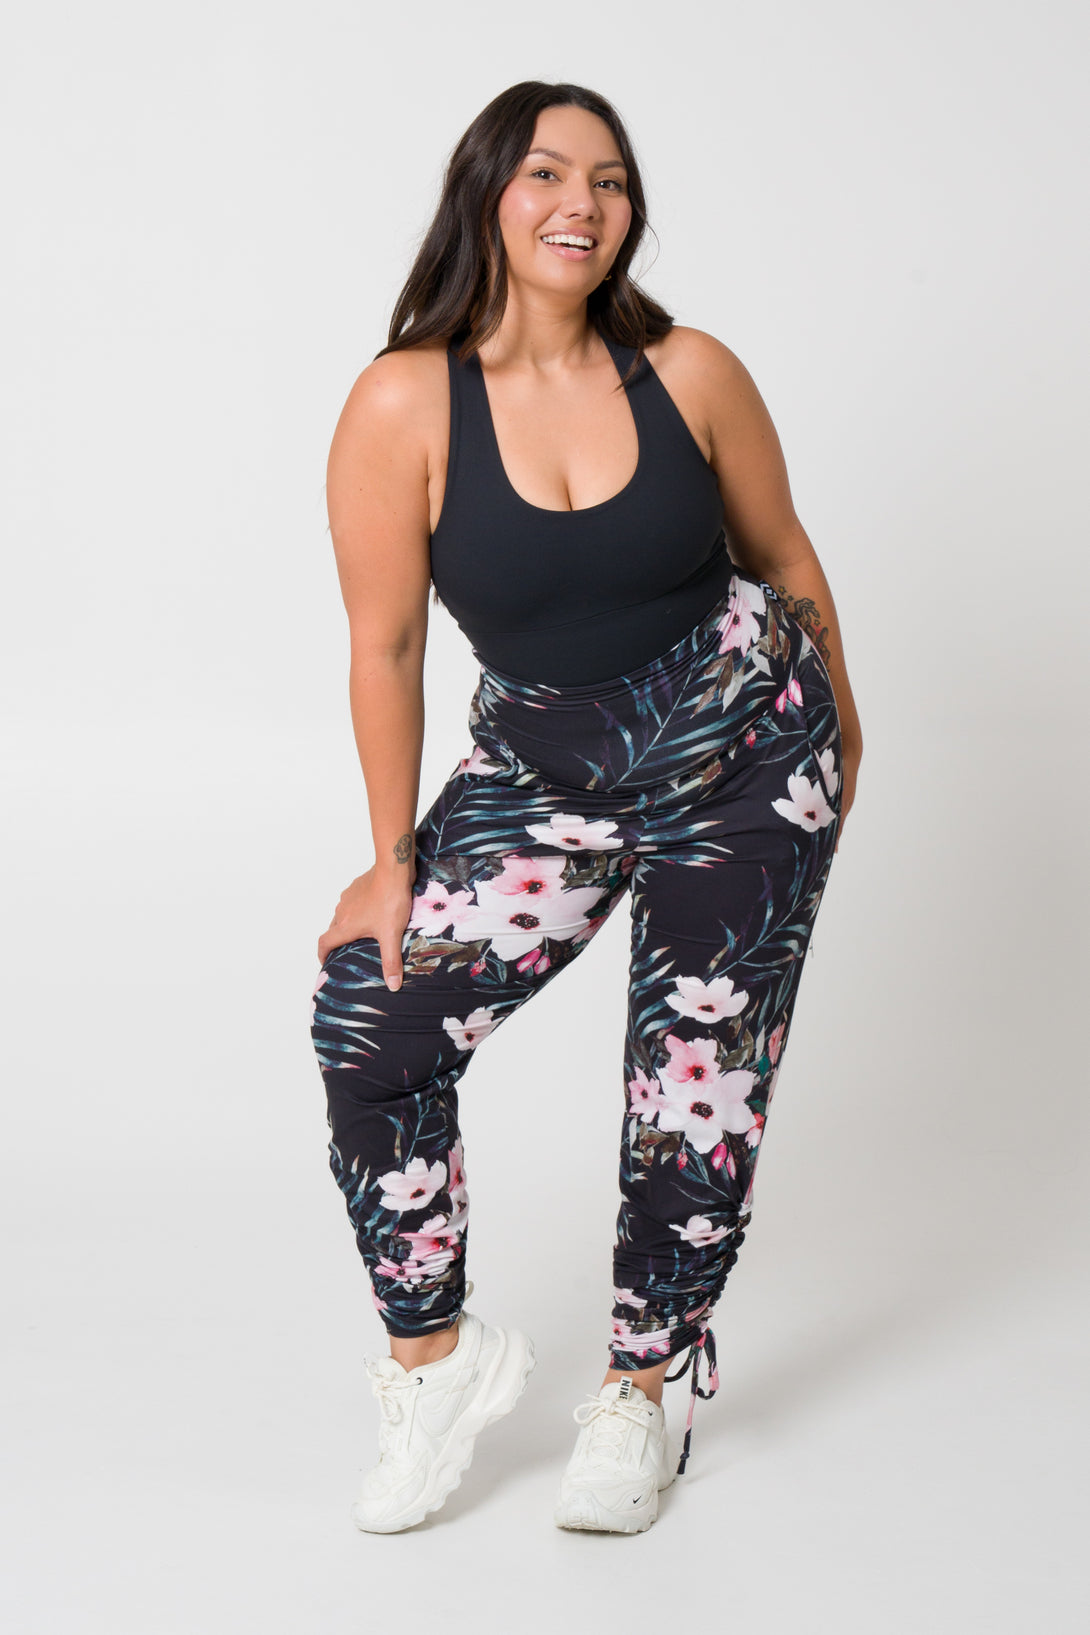 Exotic At Heart Soft To Touch - Jogger Long Tie Sided W/ Pockets - Exoticathletica